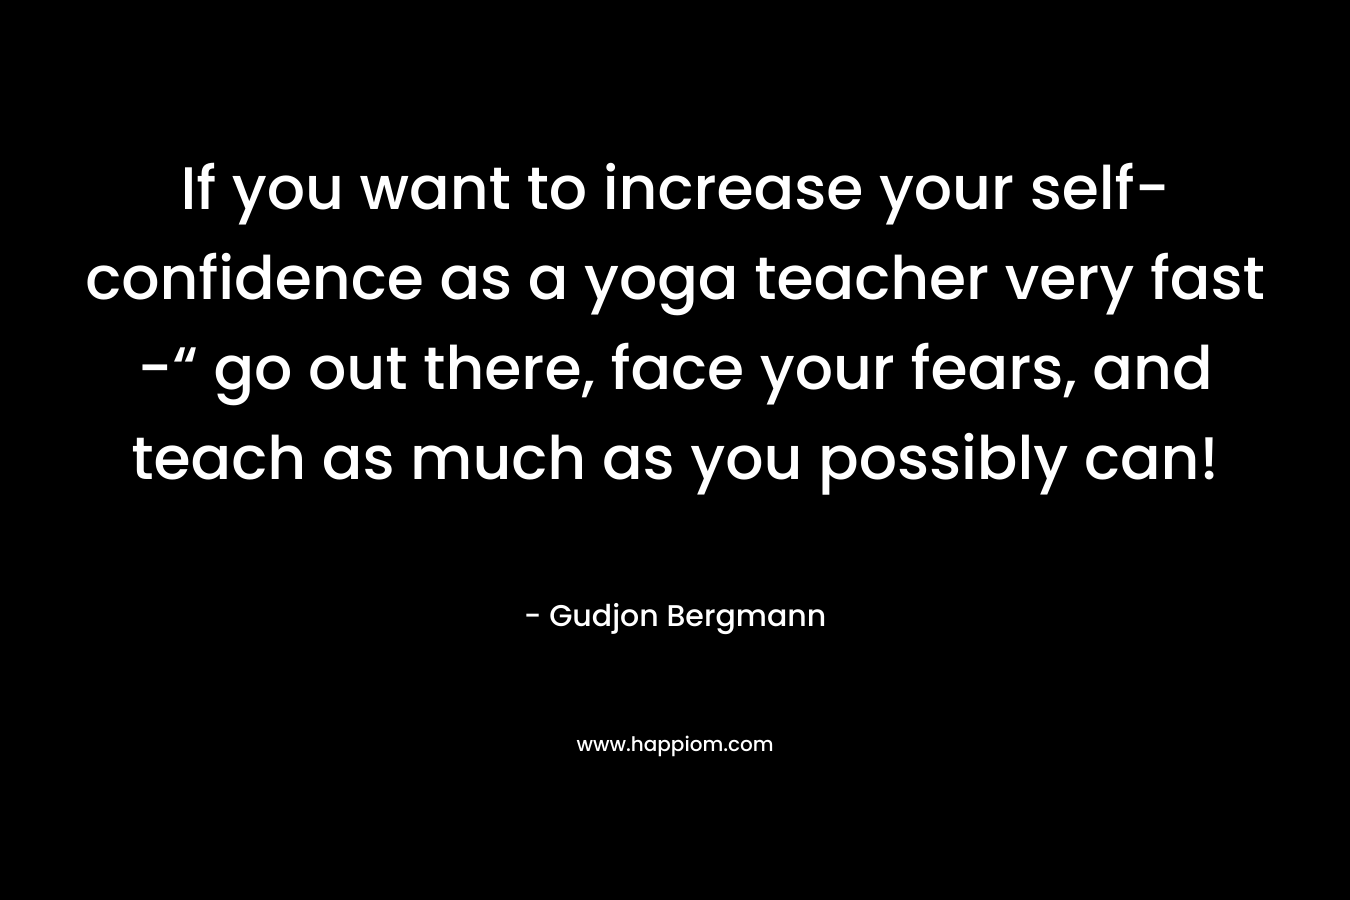 If you want to increase your self-confidence as a yoga teacher very fast -“ go out there, face your fears, and teach as much as you possibly can! – Gudjon Bergmann